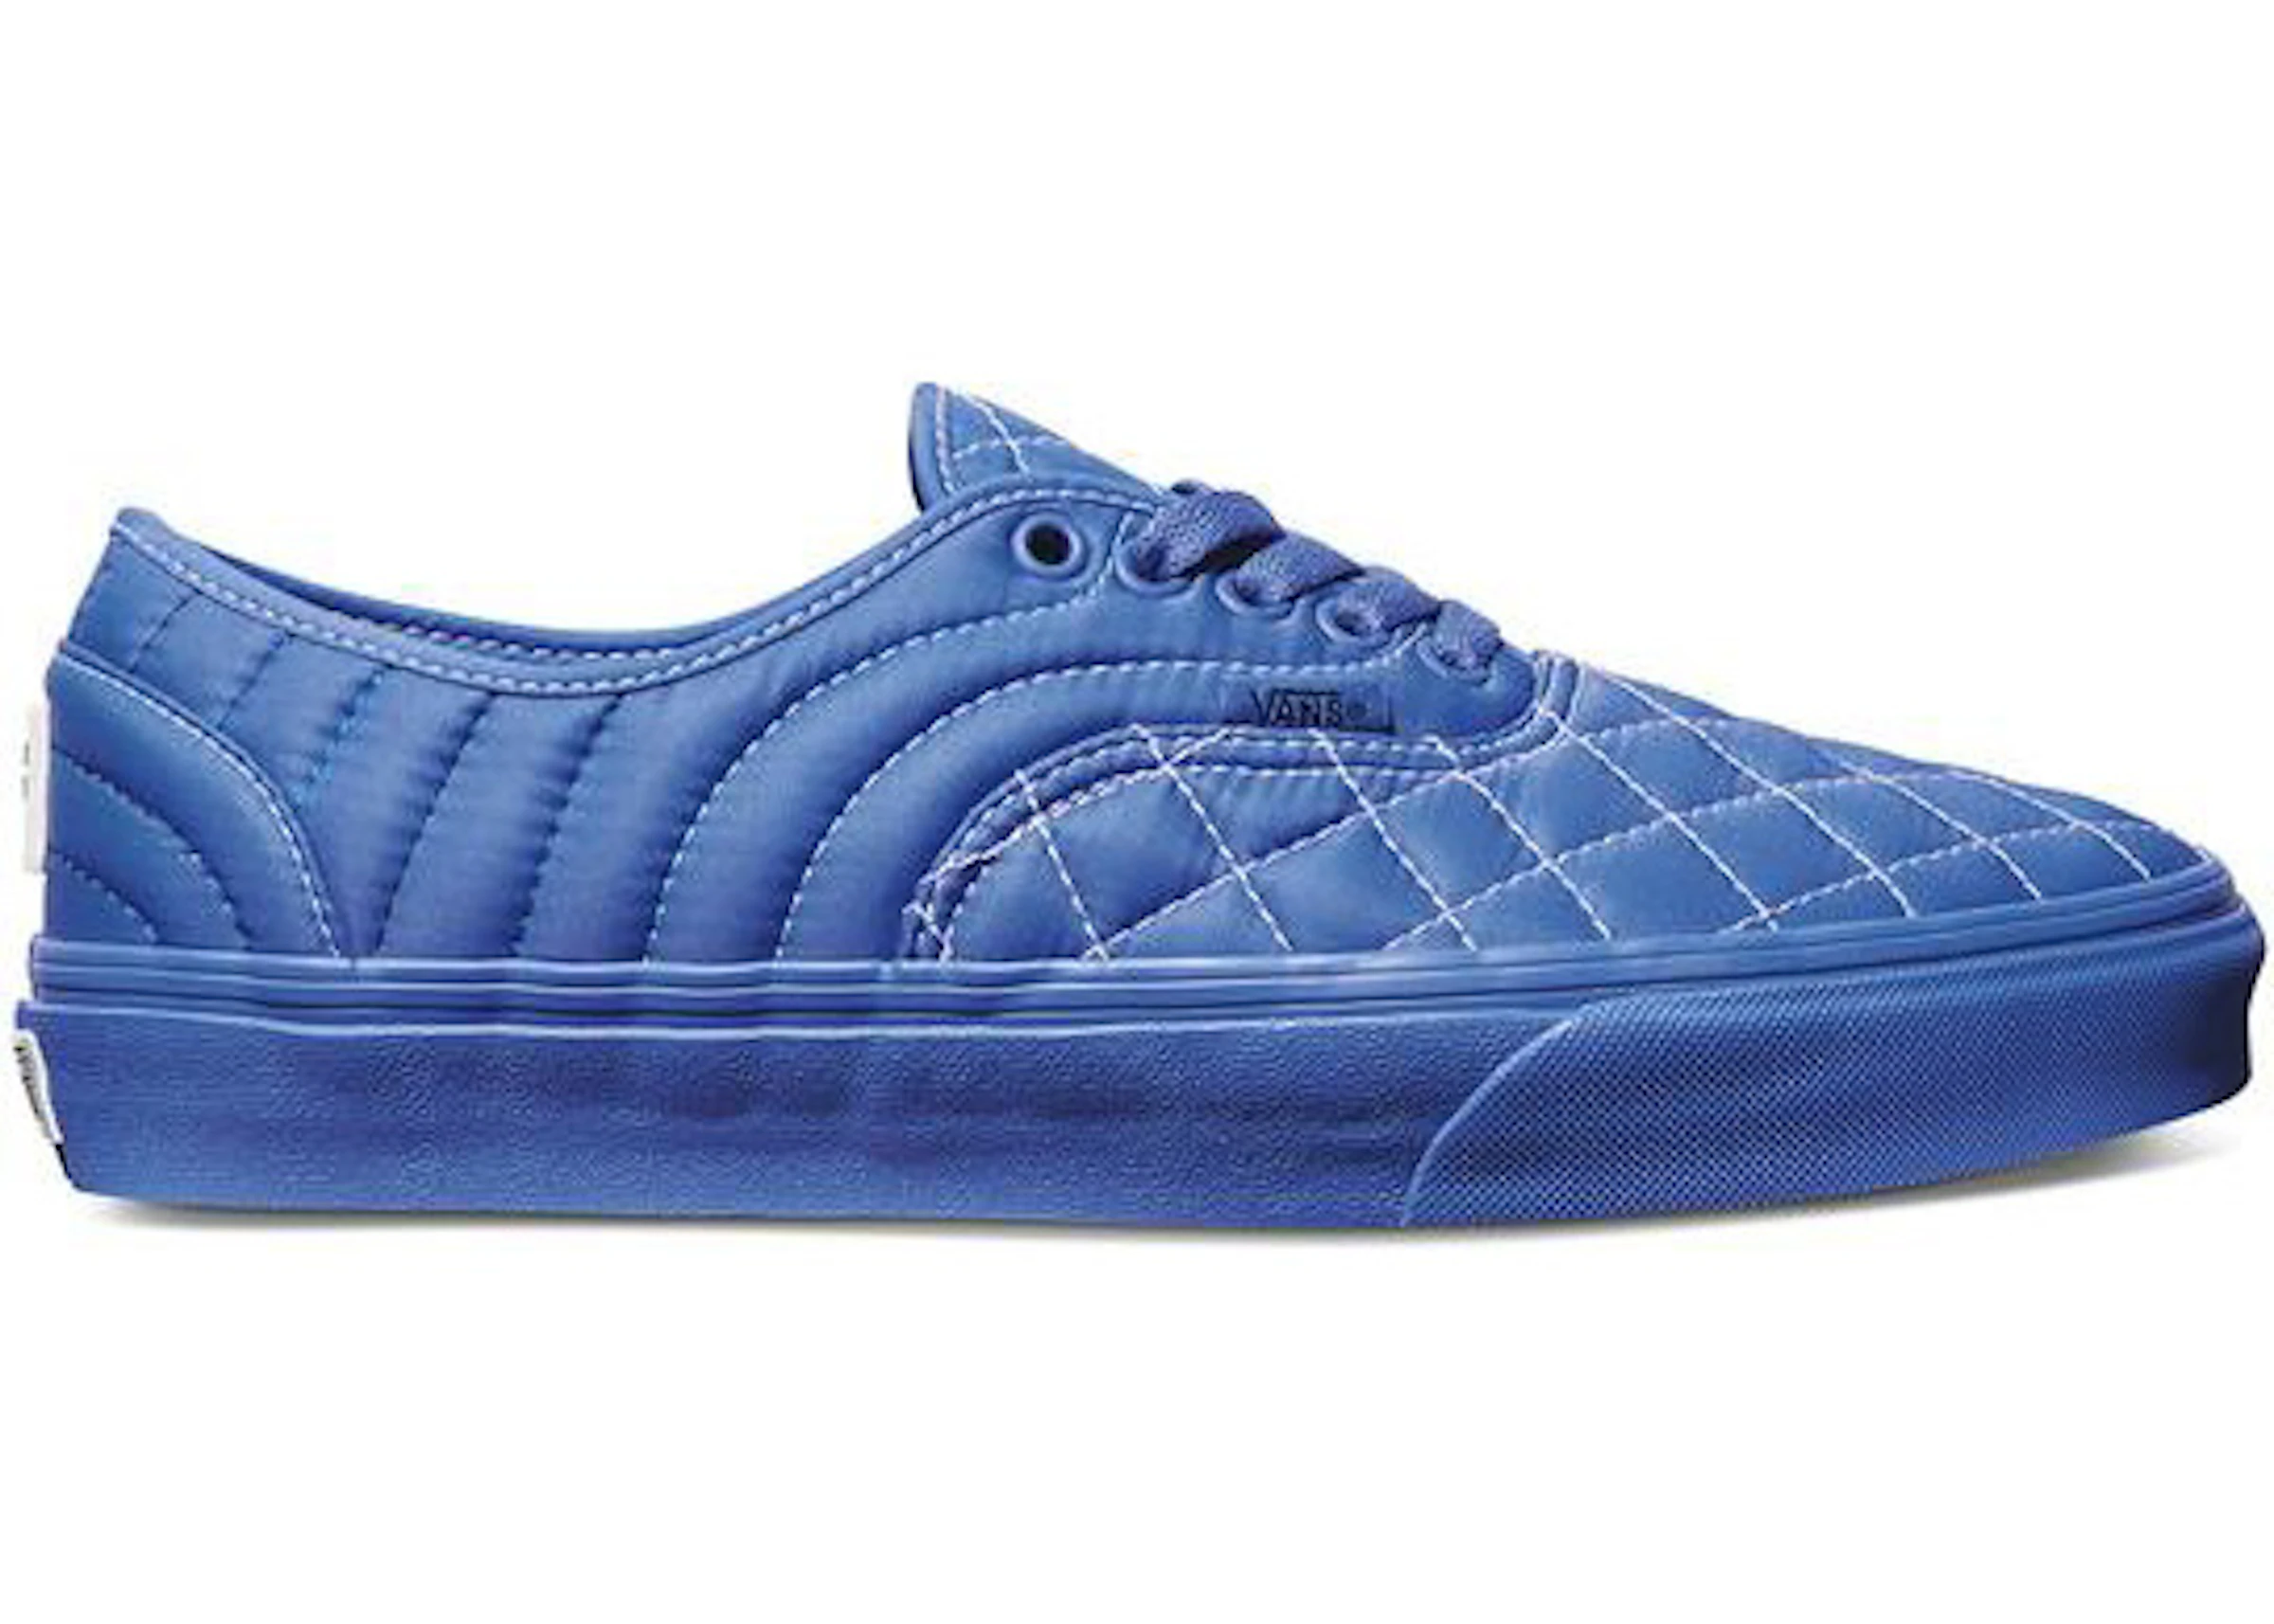 Vans Authentic Opening Ceremony Quilted Baja Blue - VN0A5HV3ZQ0 - US